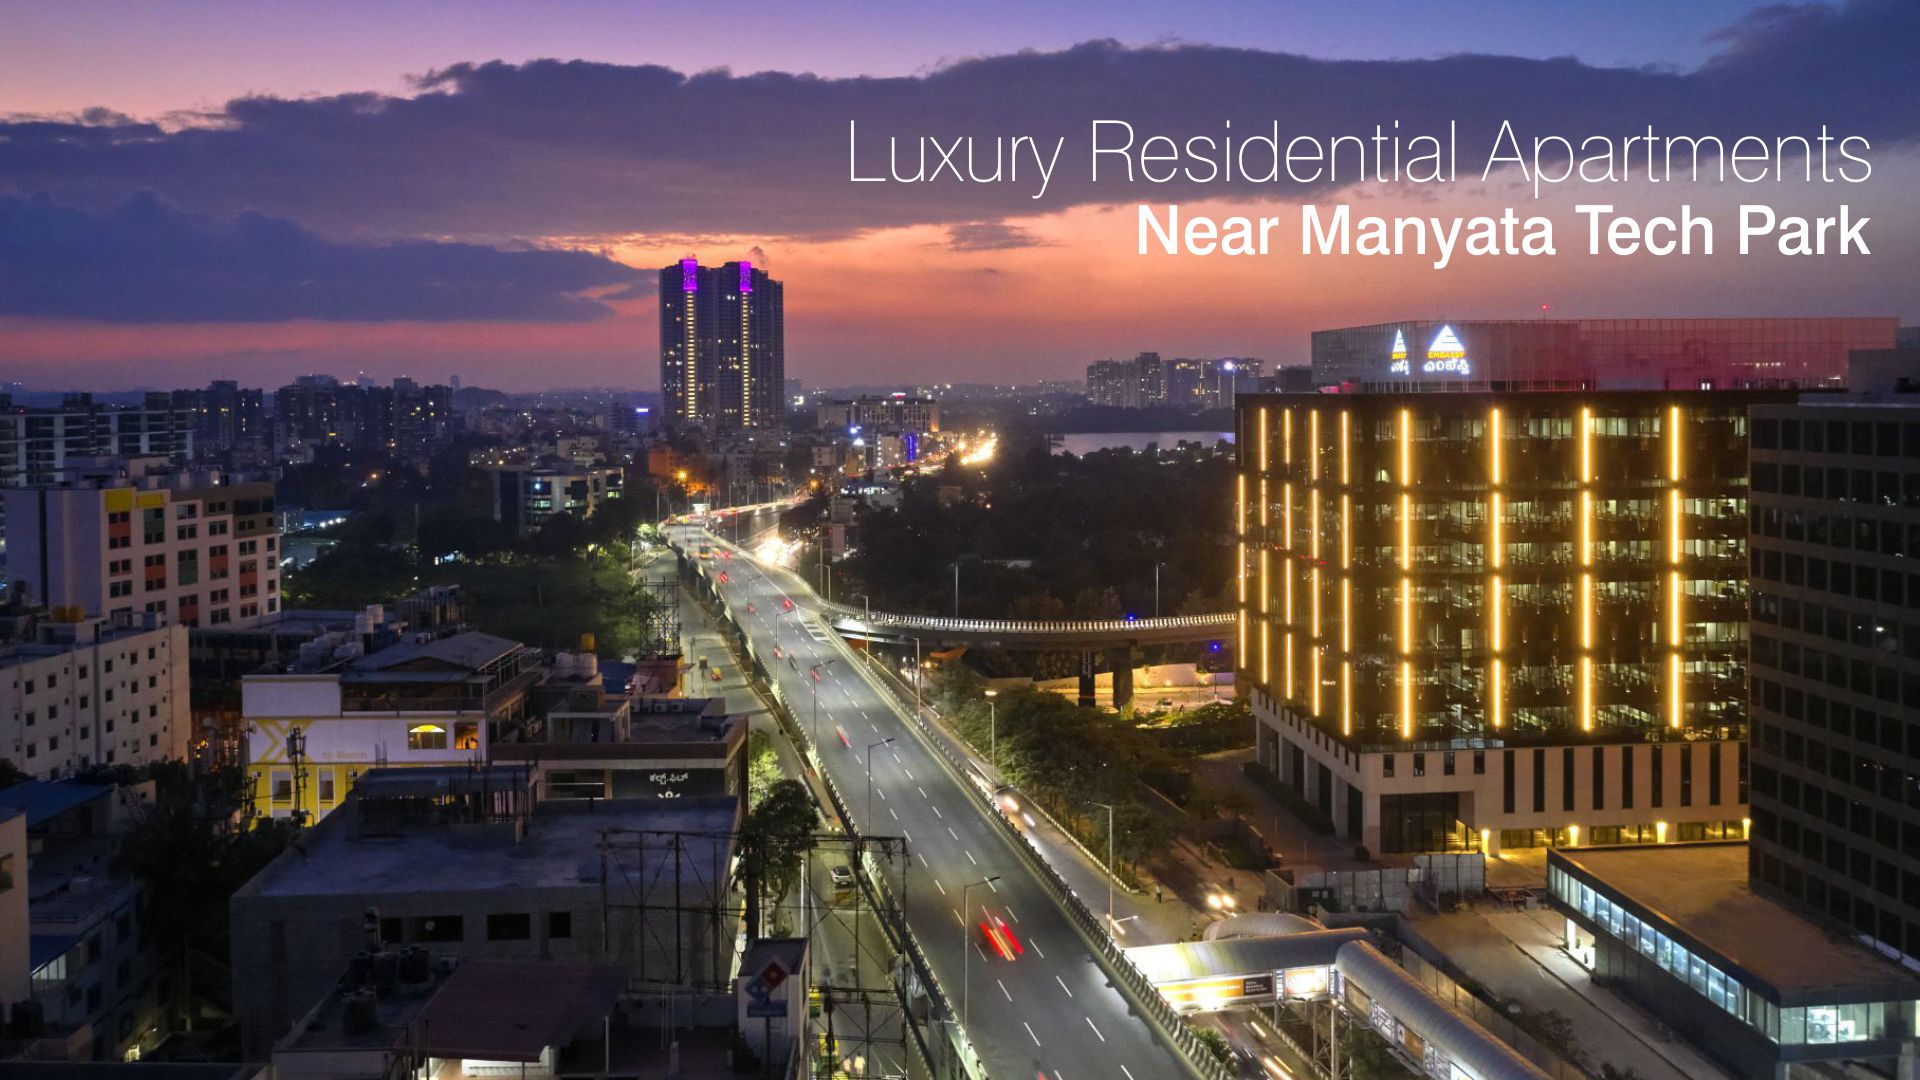 Lodha Manyata Tech Park Bangalore - Experience the Perfect Blend of Luxury and Convenience Residences